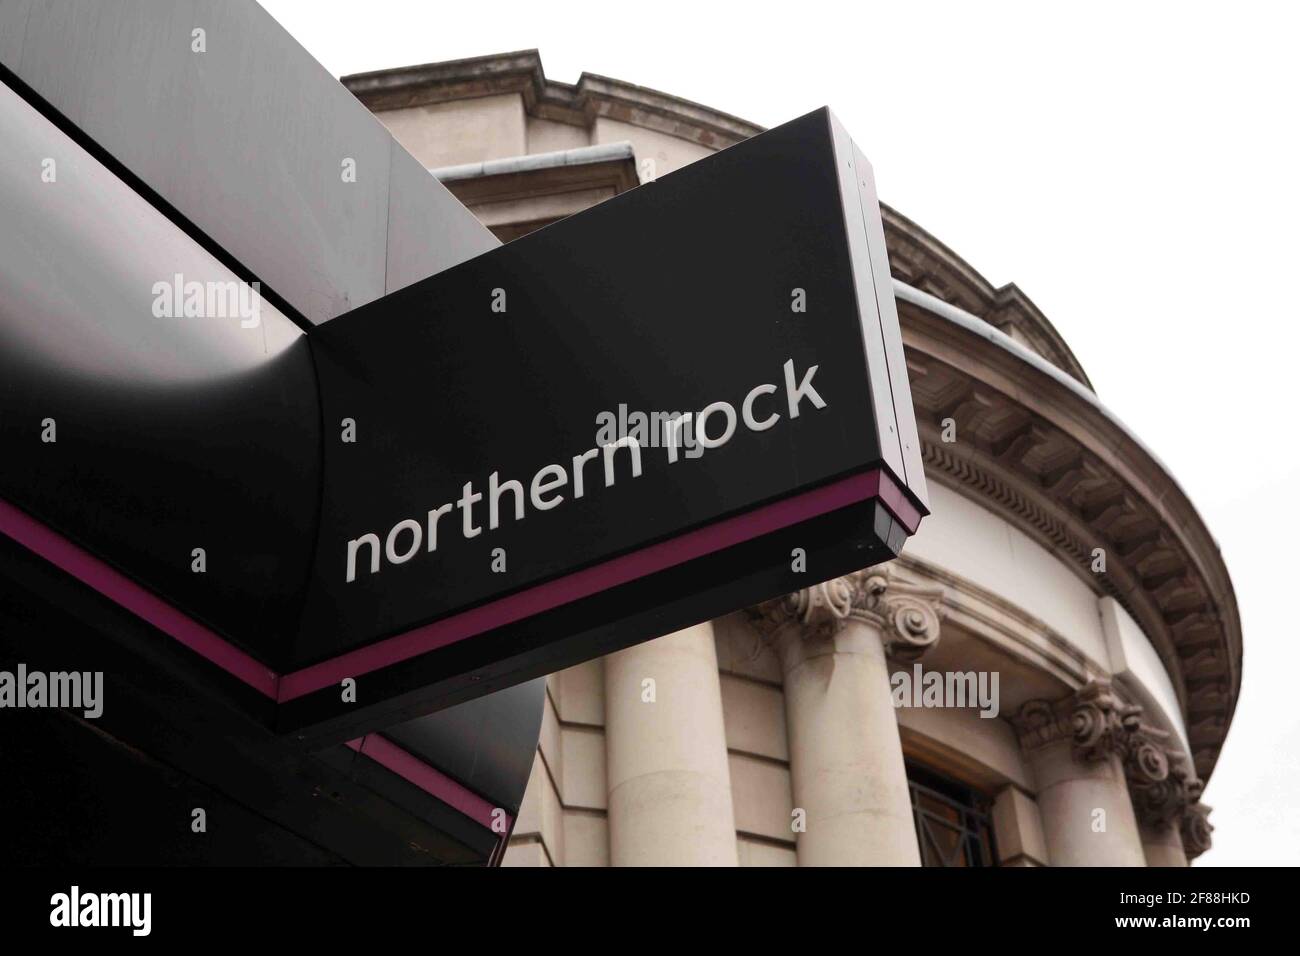 Northern Rock...... public queue outside the Nothern Rock branch in Golders Green in north London.  pic David Sandison 14/9/2007 Stock Photo